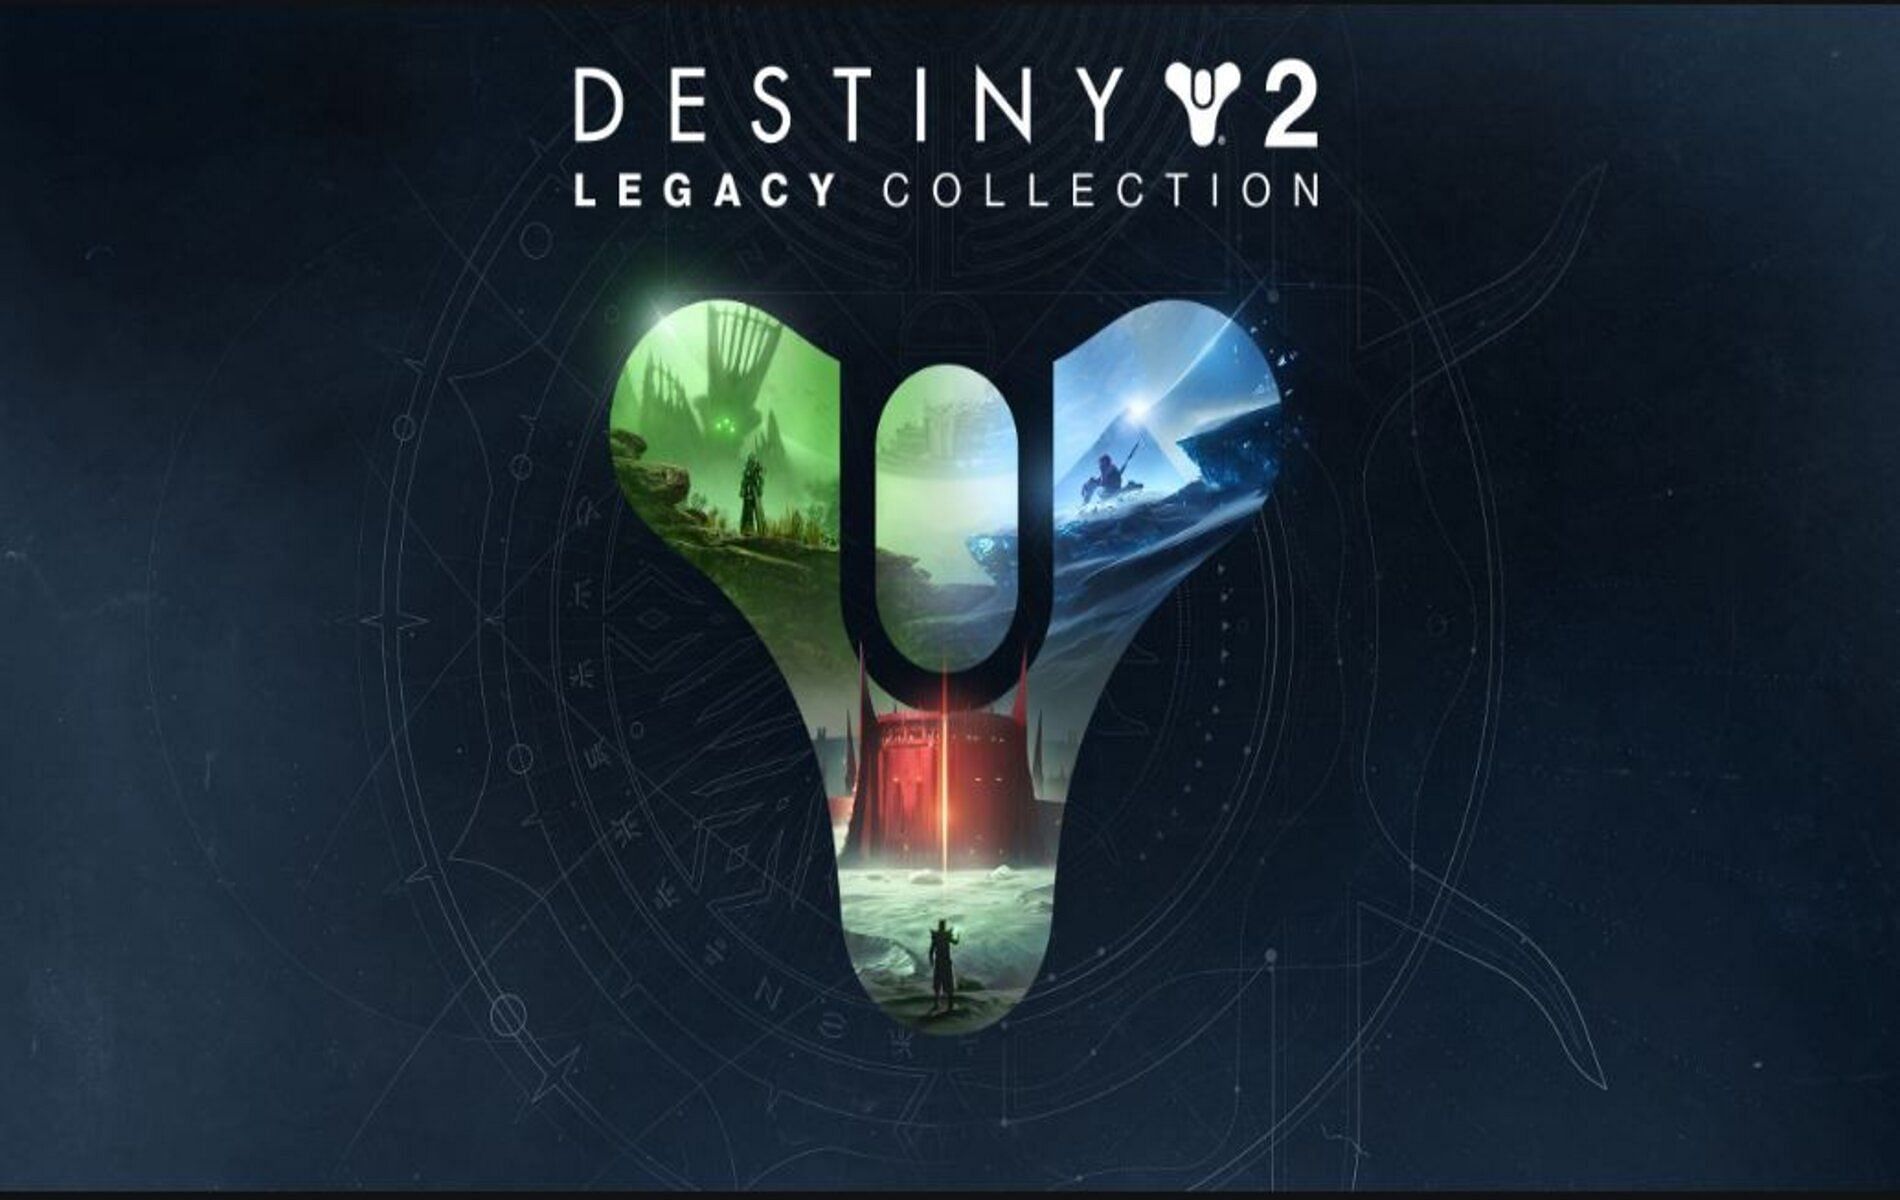 How to get Destiny 2 Legacy Collection for free on Epic Games Store